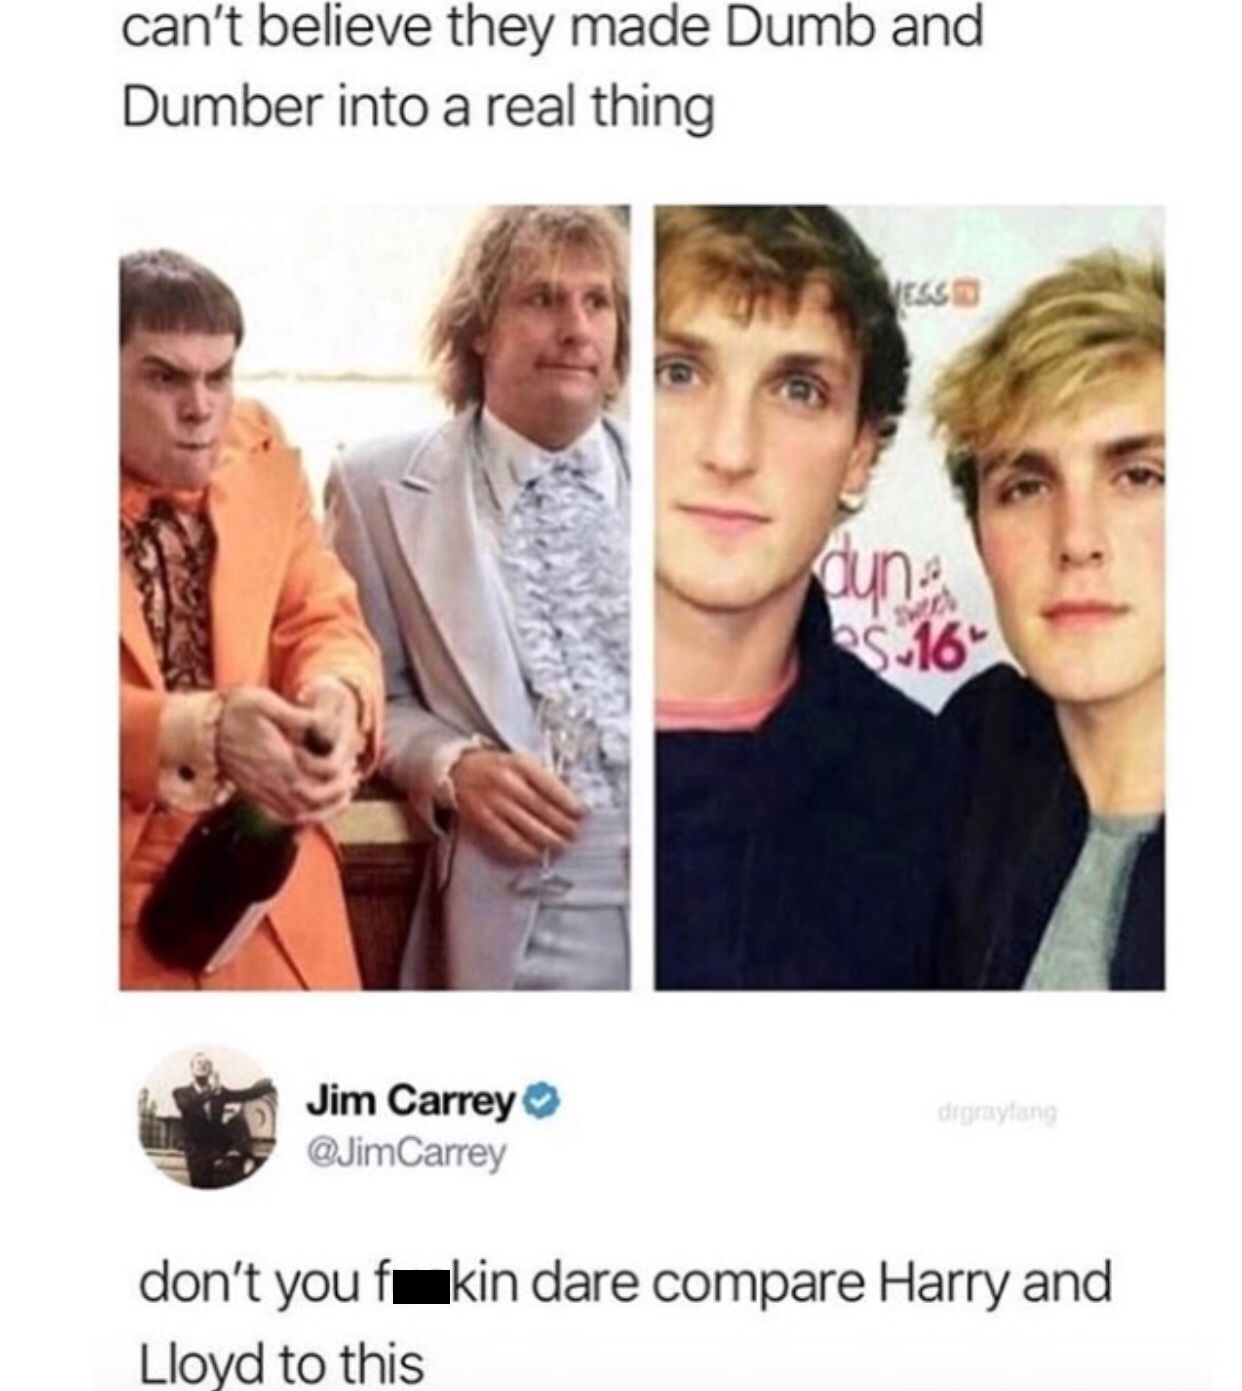 jeff daniels dumb and dumber - can't believe they made Dumb and Dumber into a real thing digitayang Jim Carrey Carrey don't you fakin dare compare Harry and Lloyd to this